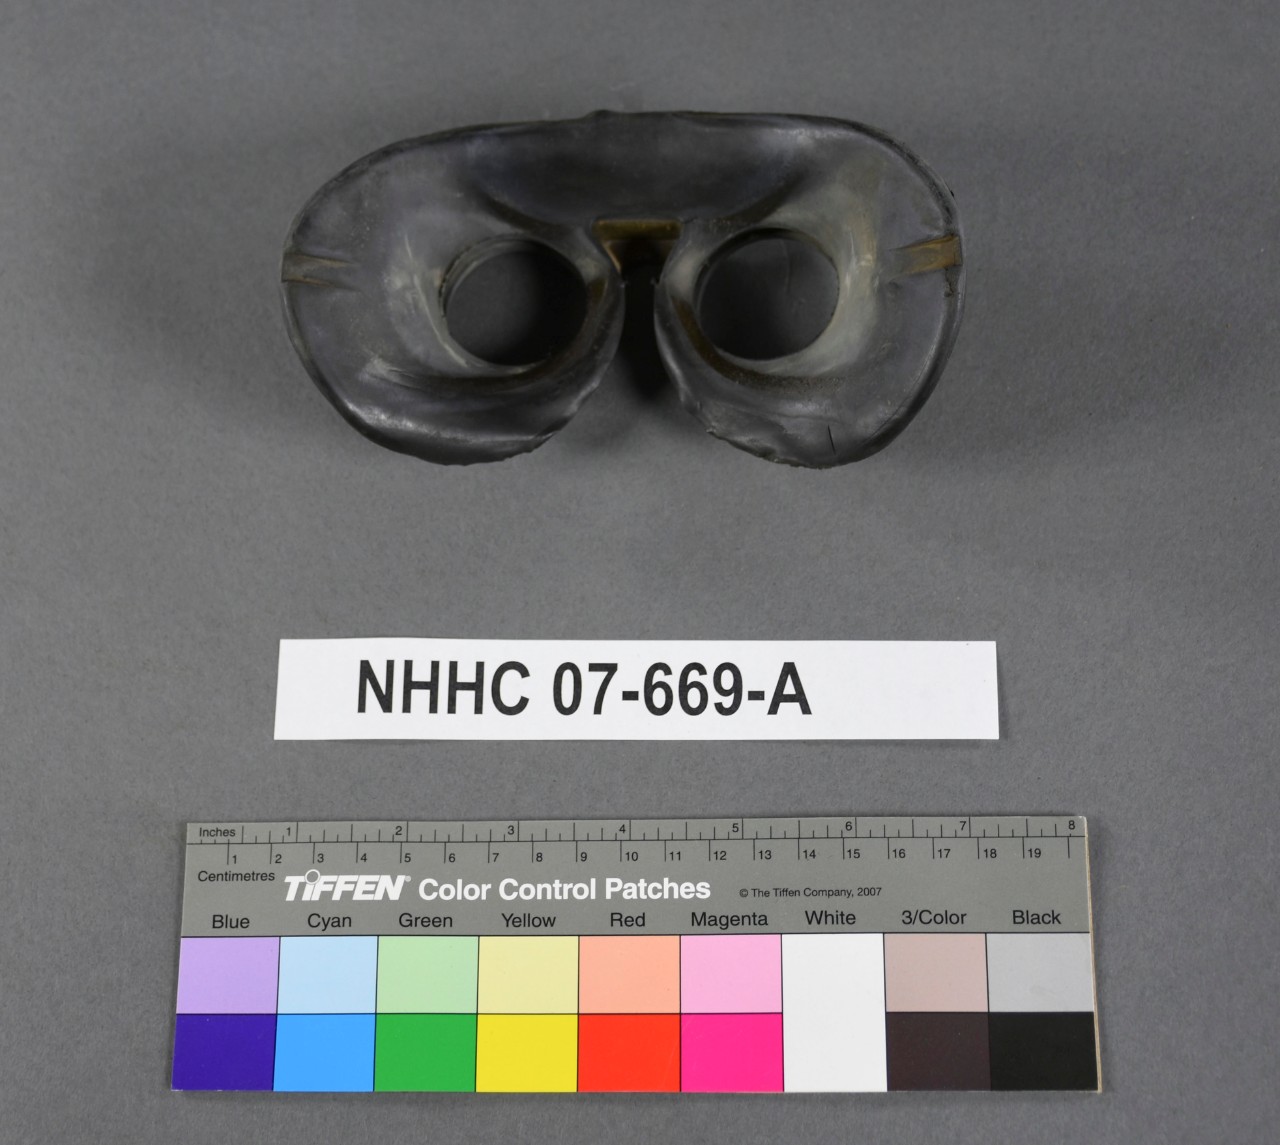 Rubber eyepieces for Japanese Binoculars captured at leyte gulf